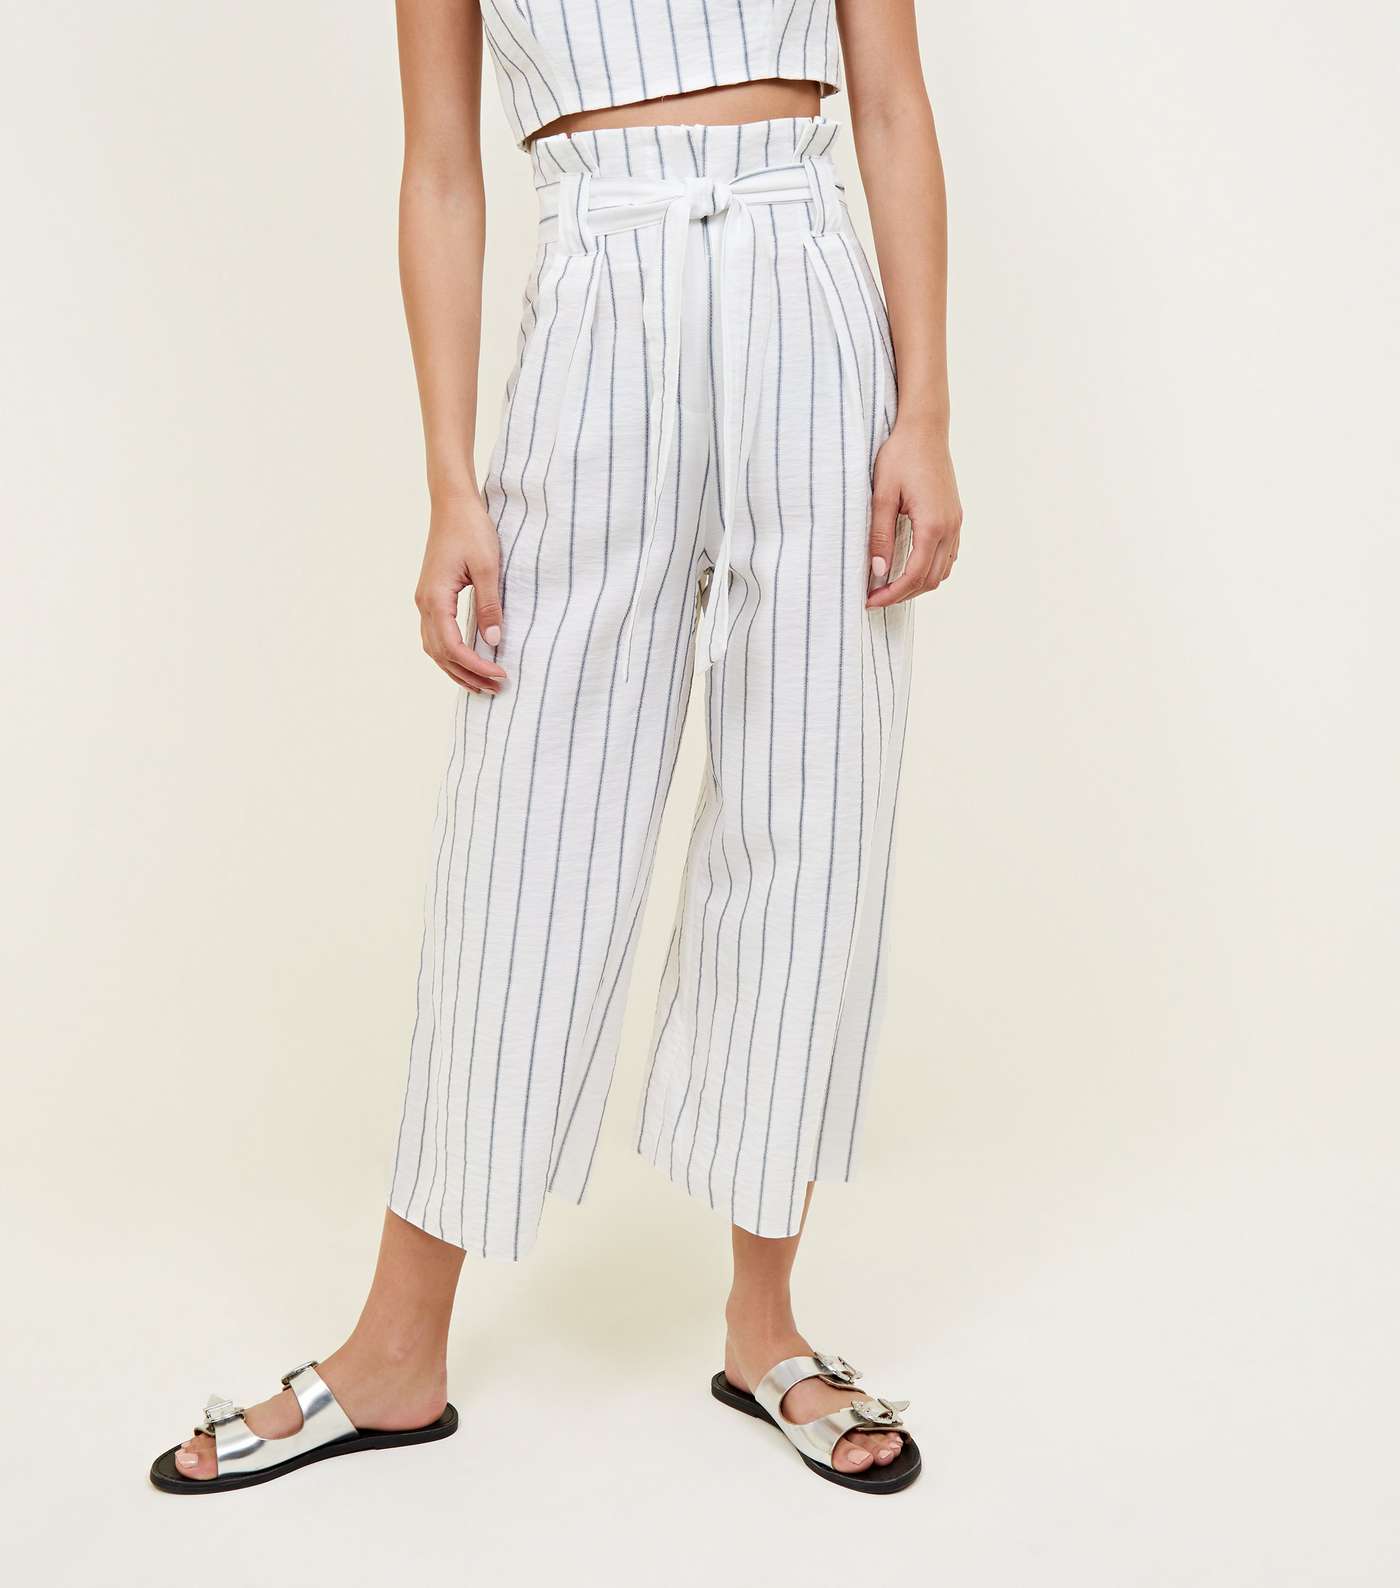 White Stripe Linen-Look Paperbag Culottes Image 2